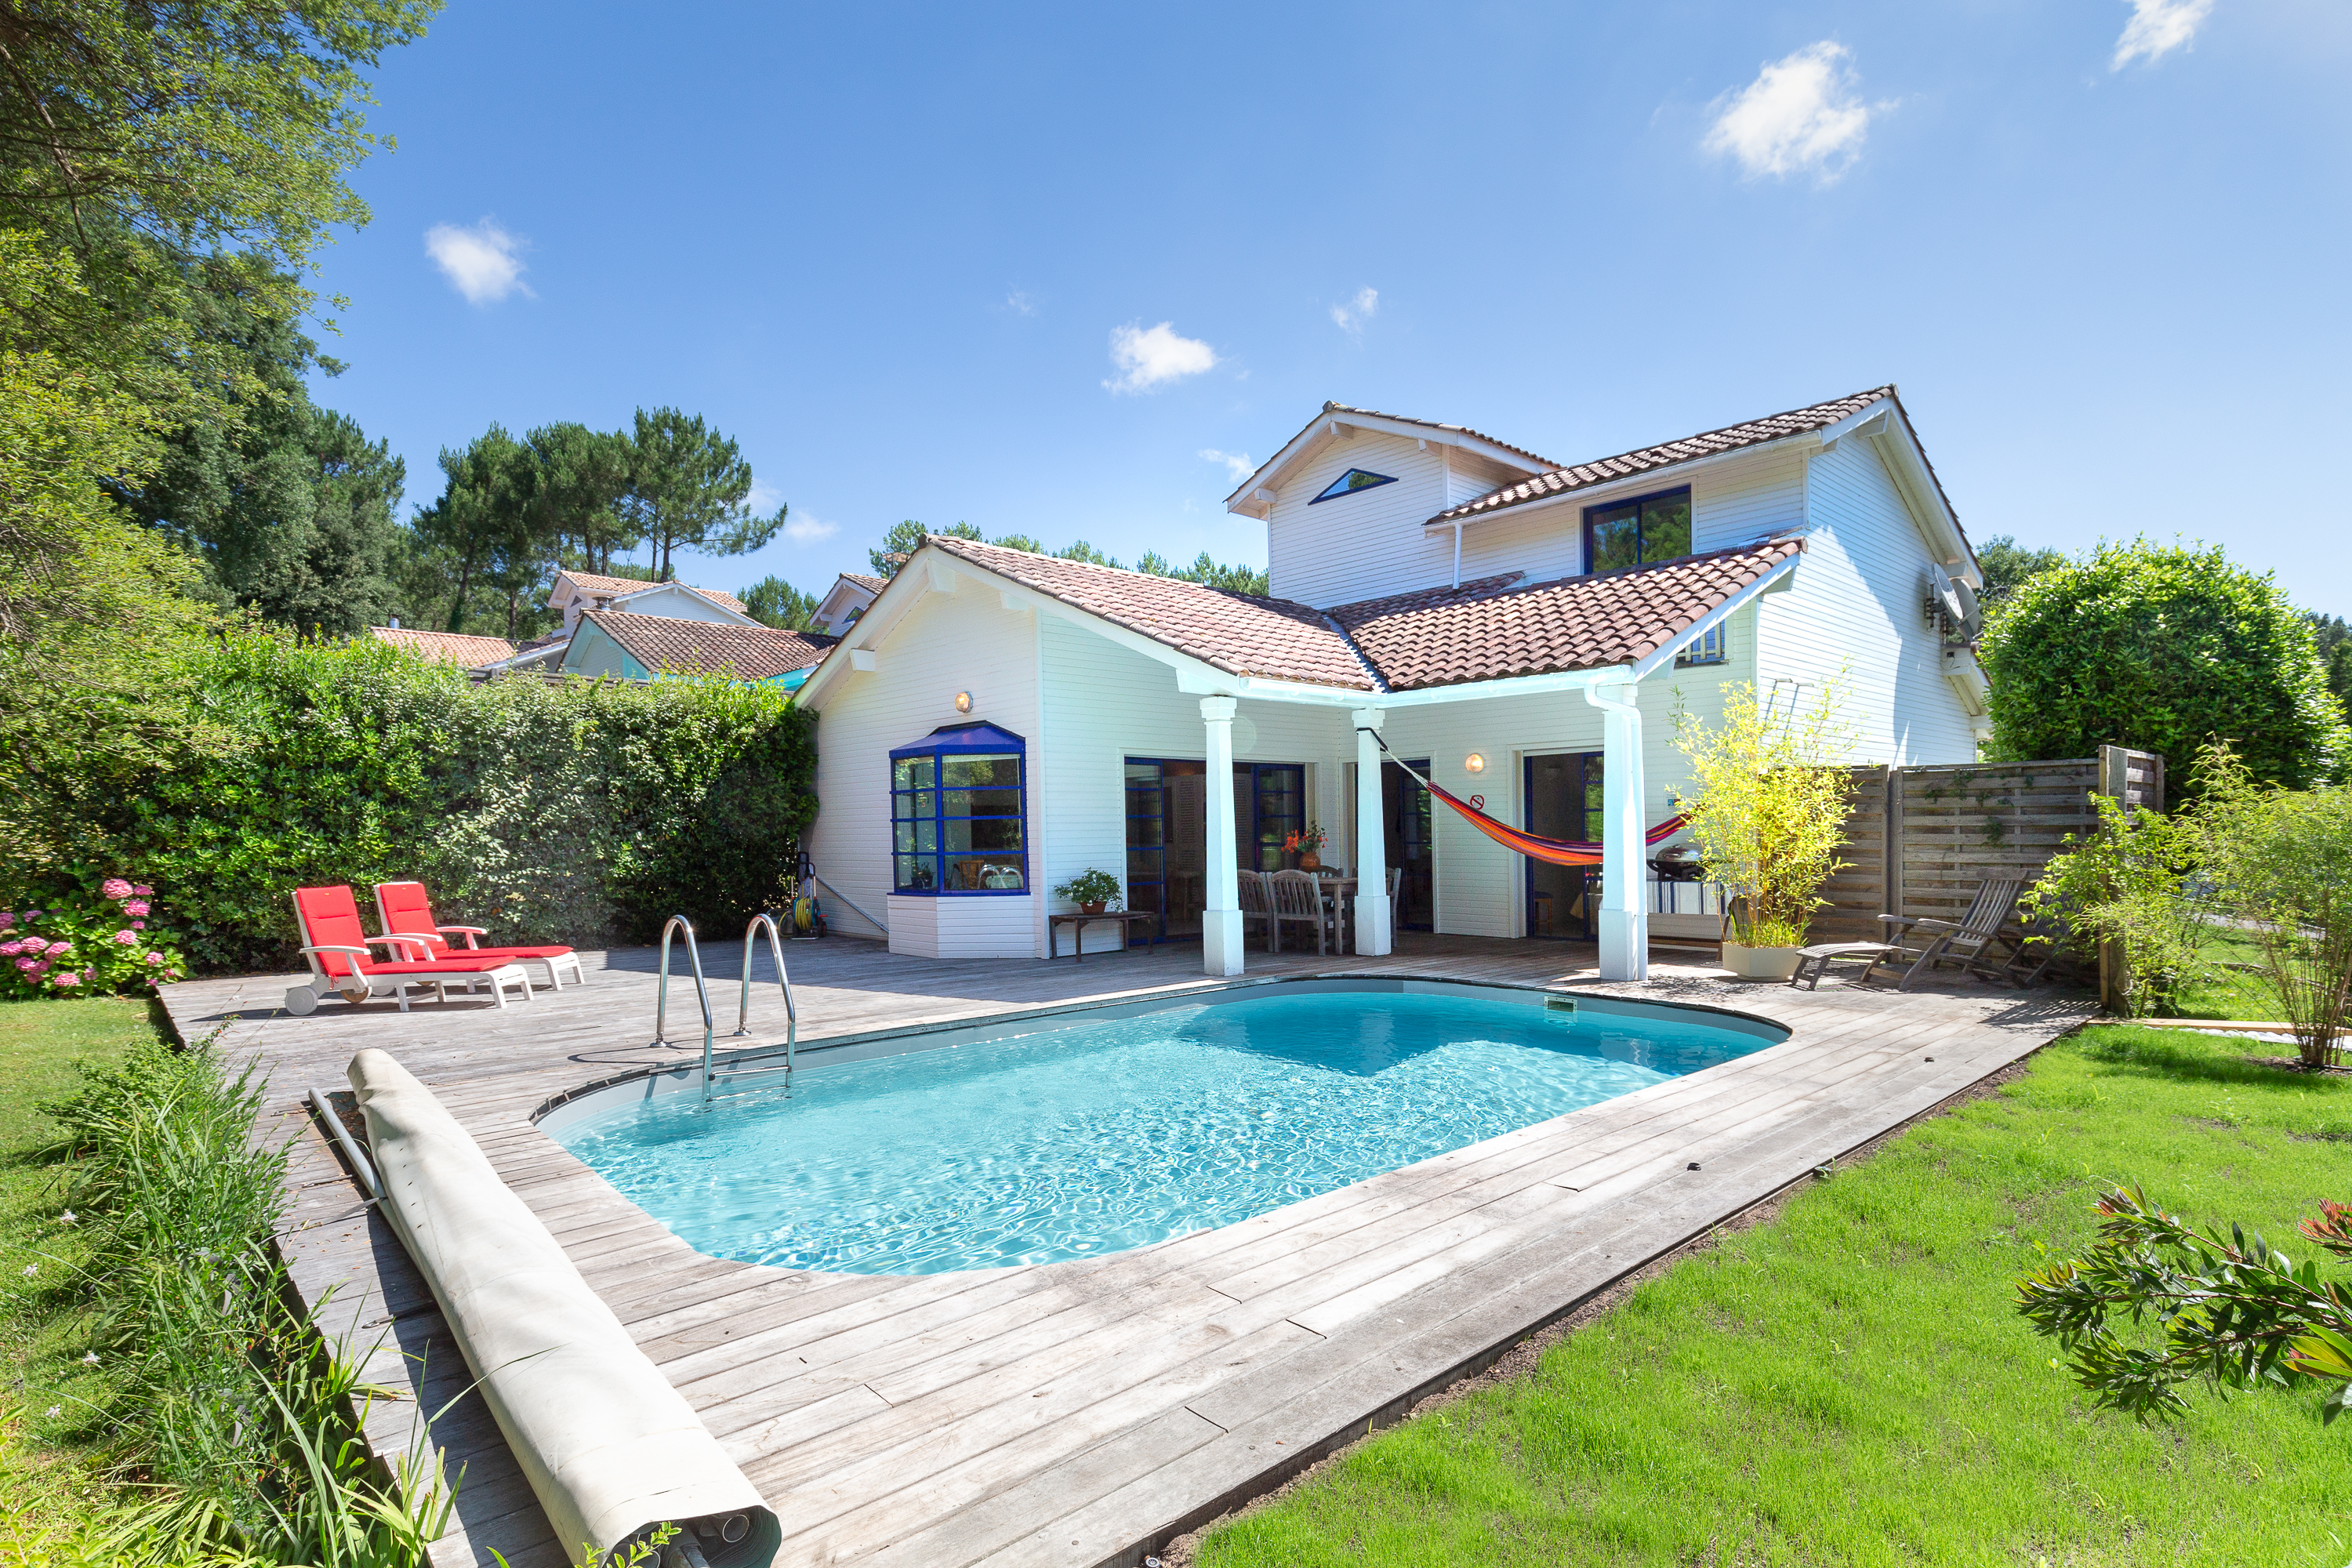 Private Villa with pool and close to beach & golf - Villas for Rent in  Moliets-et-Maa, Aquitaine-Limousin-Poitou-Charentes, France